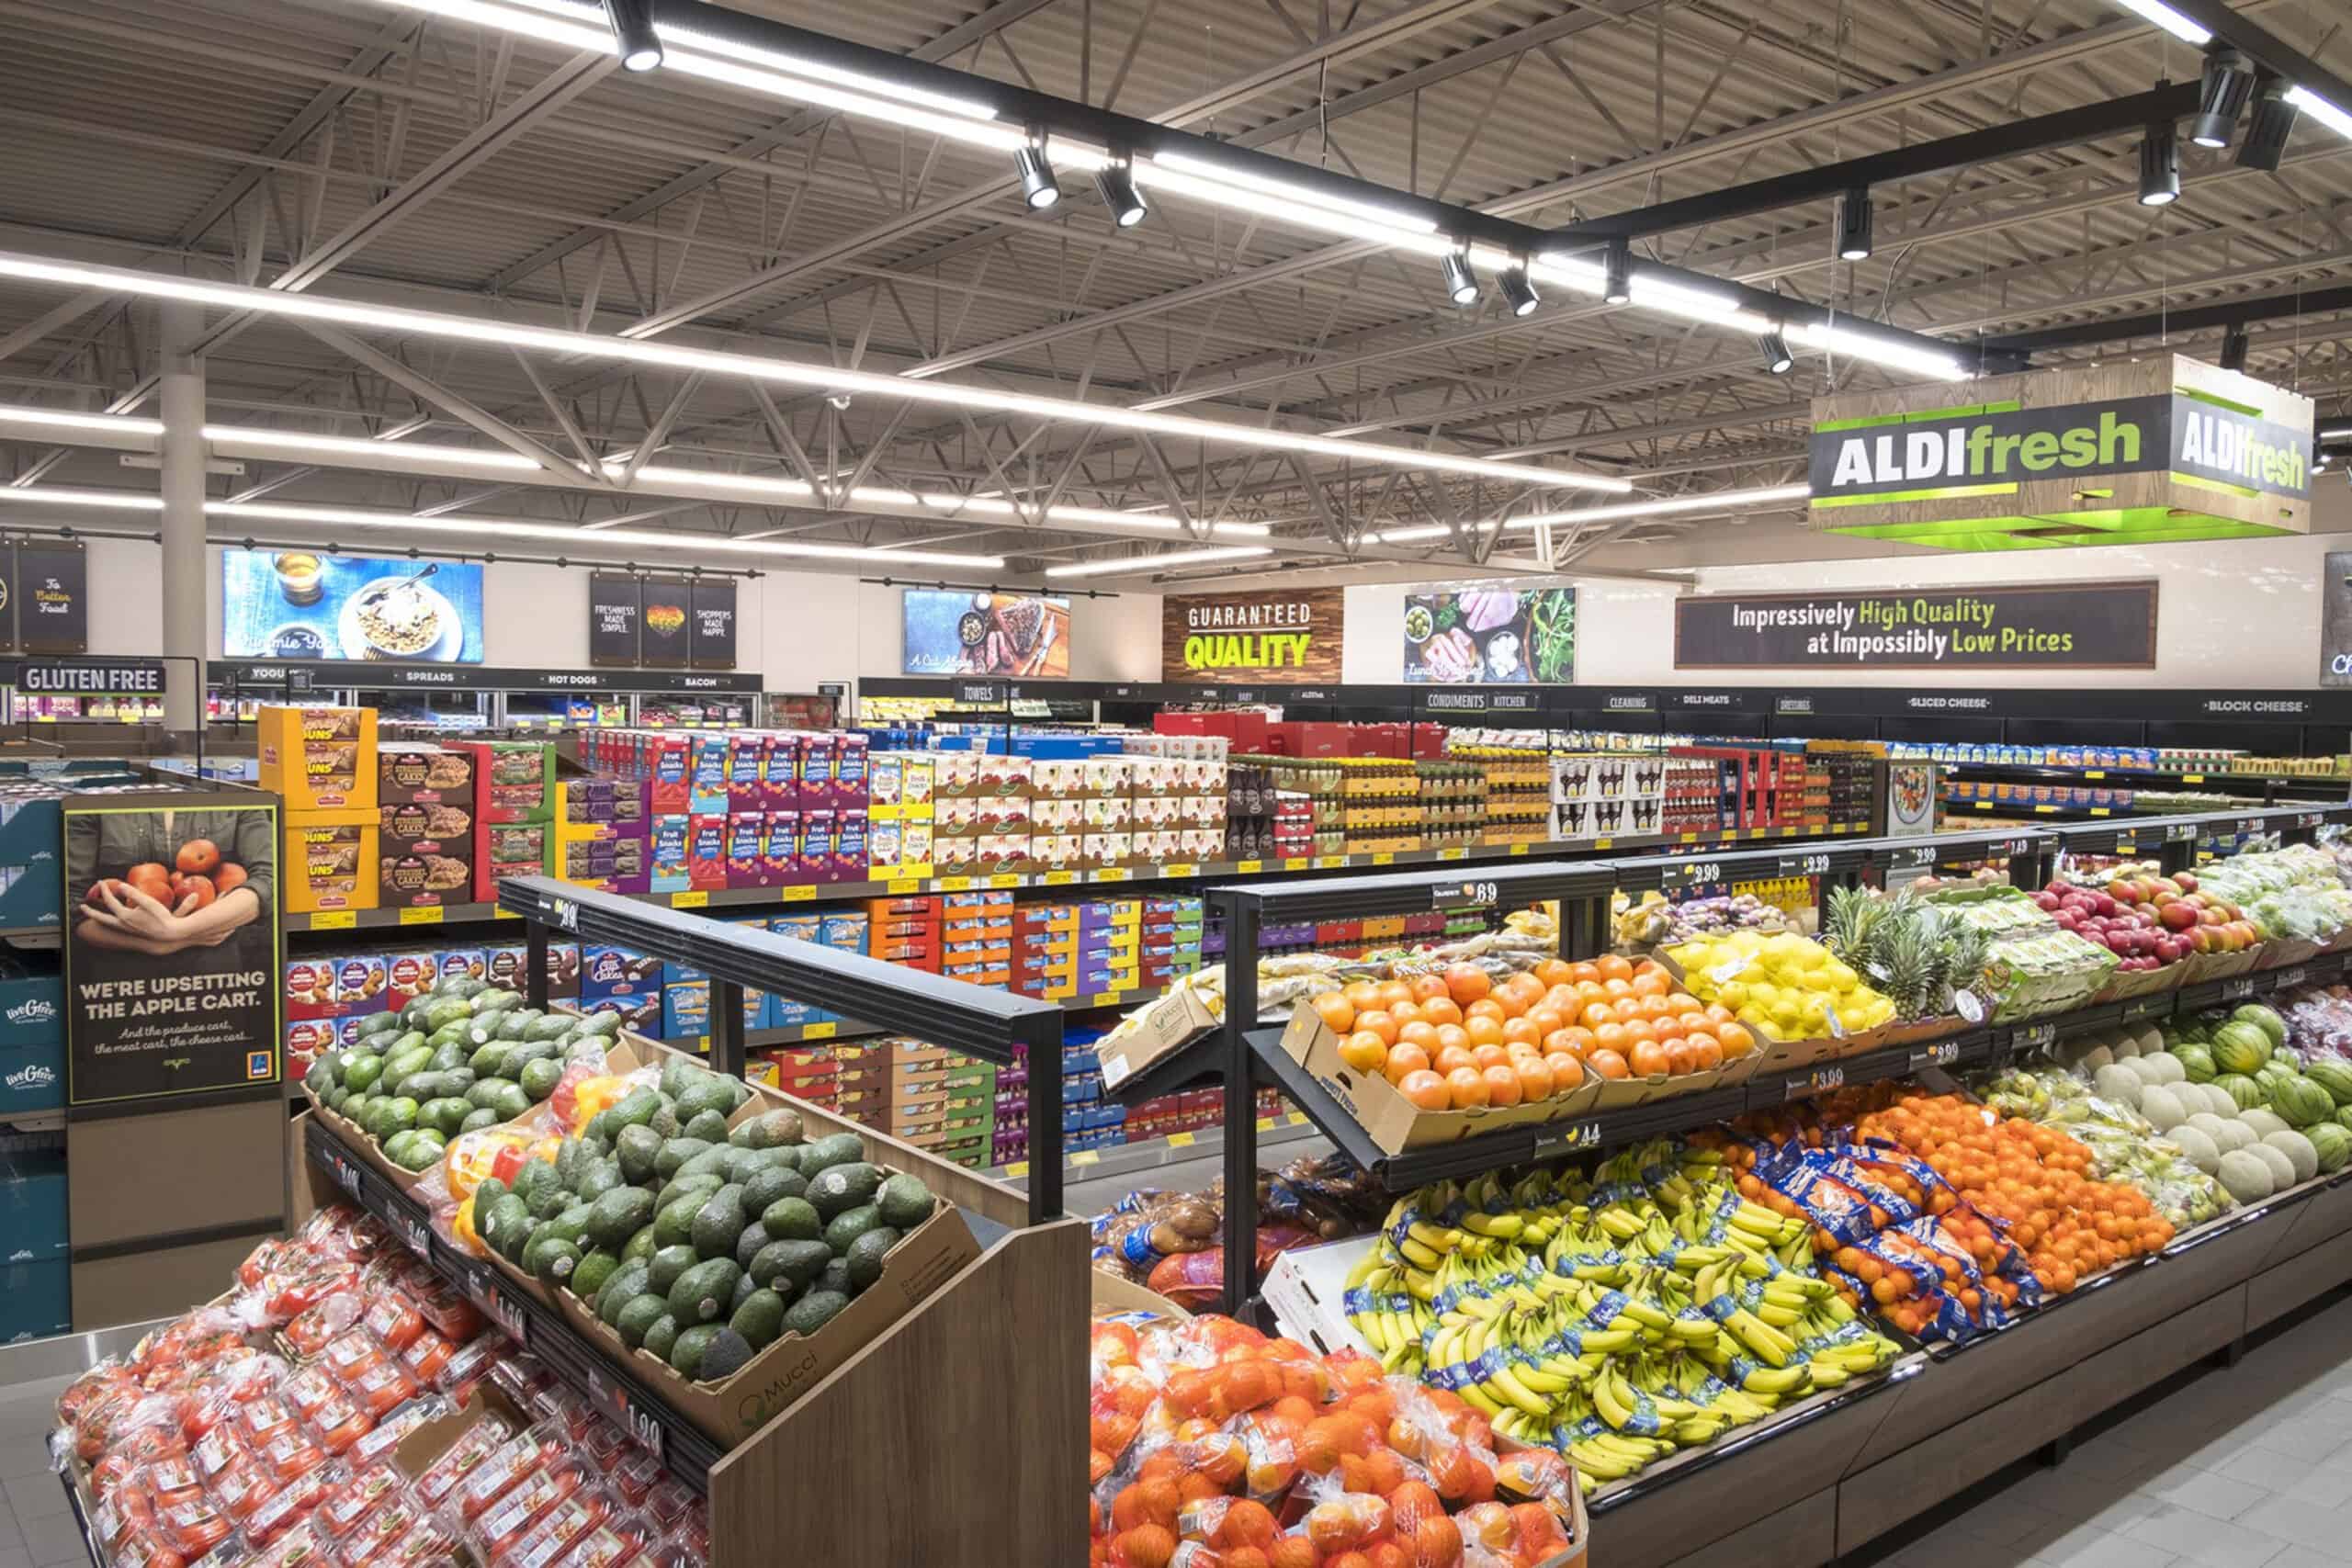 The fresh produce section of Aldi stores showcasing tomatoes, avocados, and oranges